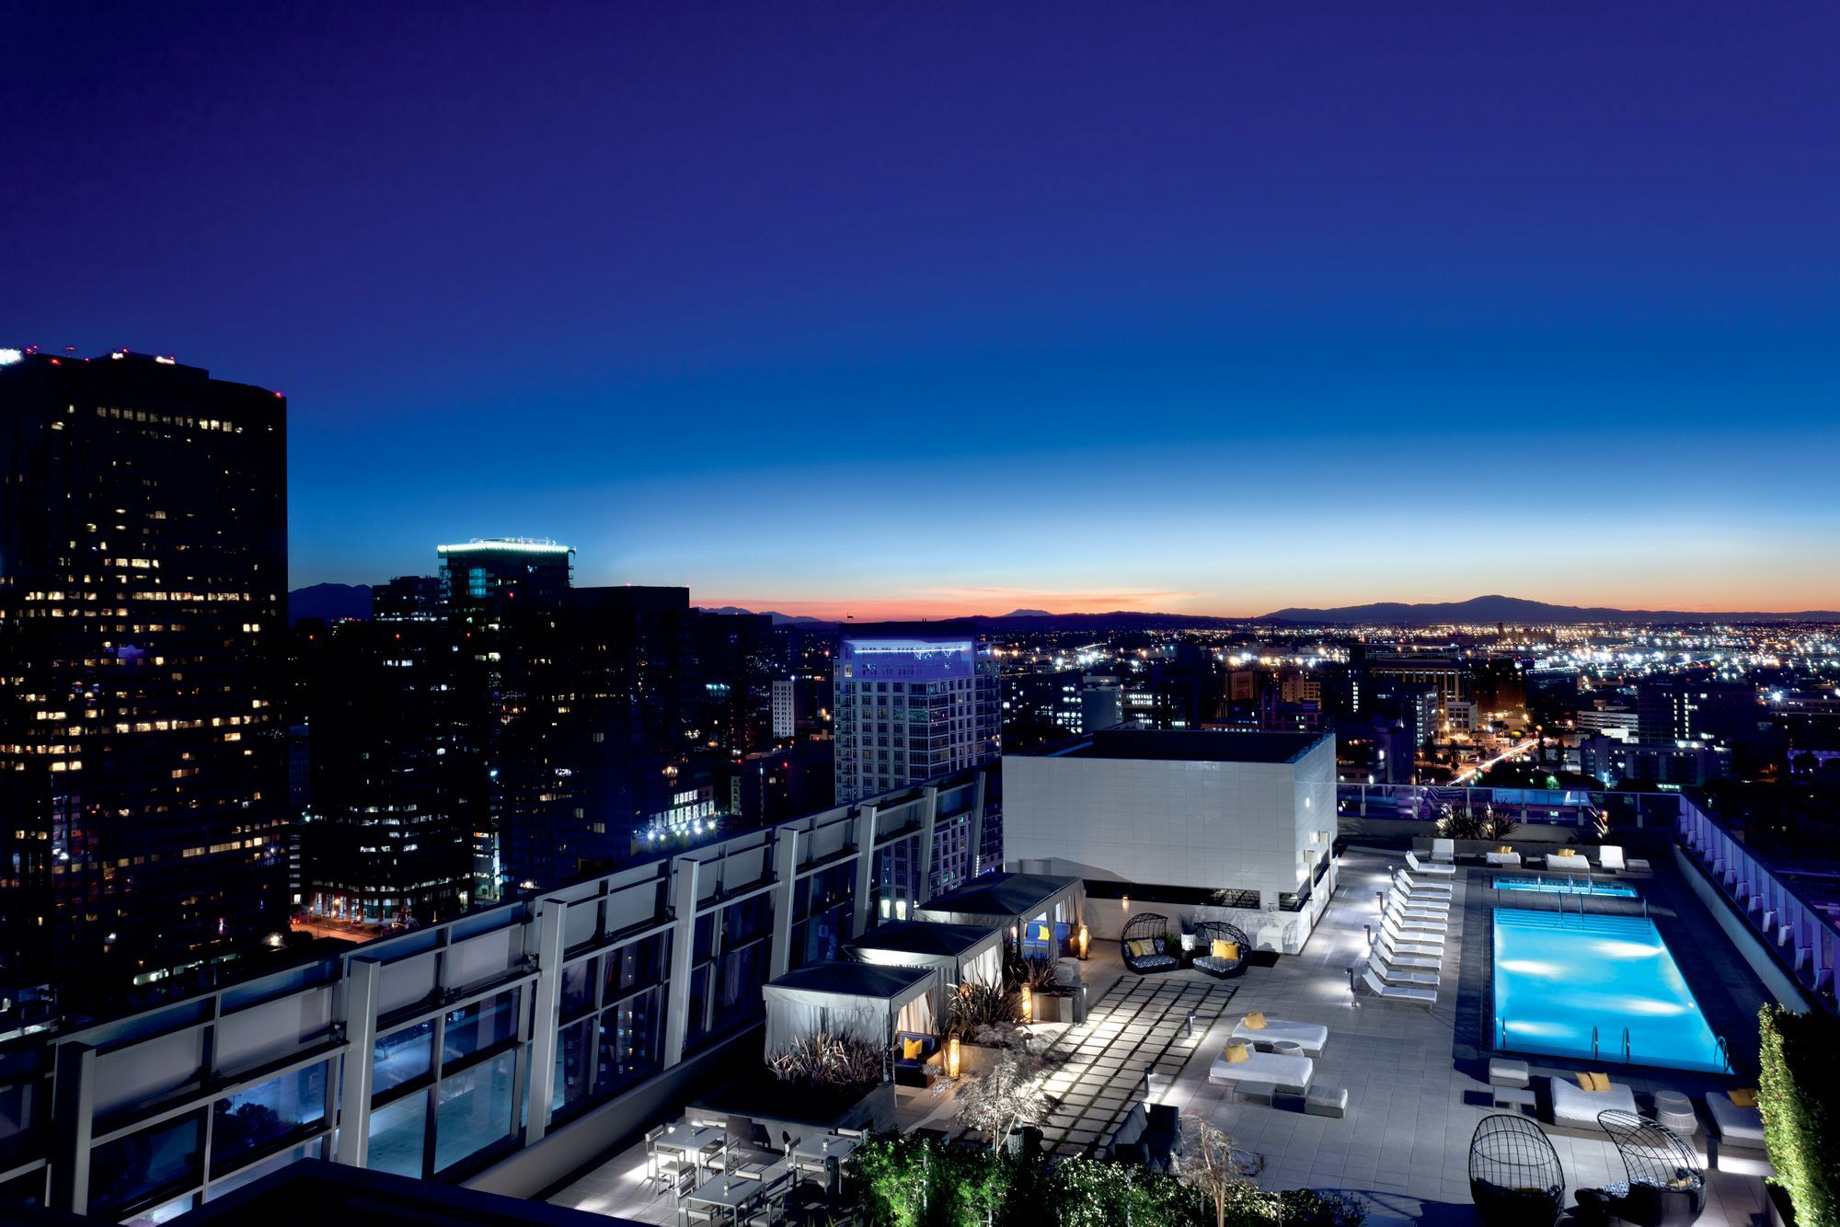 The Ritz-Carlton, Los Angeles L.A. Live Hotel - Los Angeles, CA, USA - Rooftop Deck